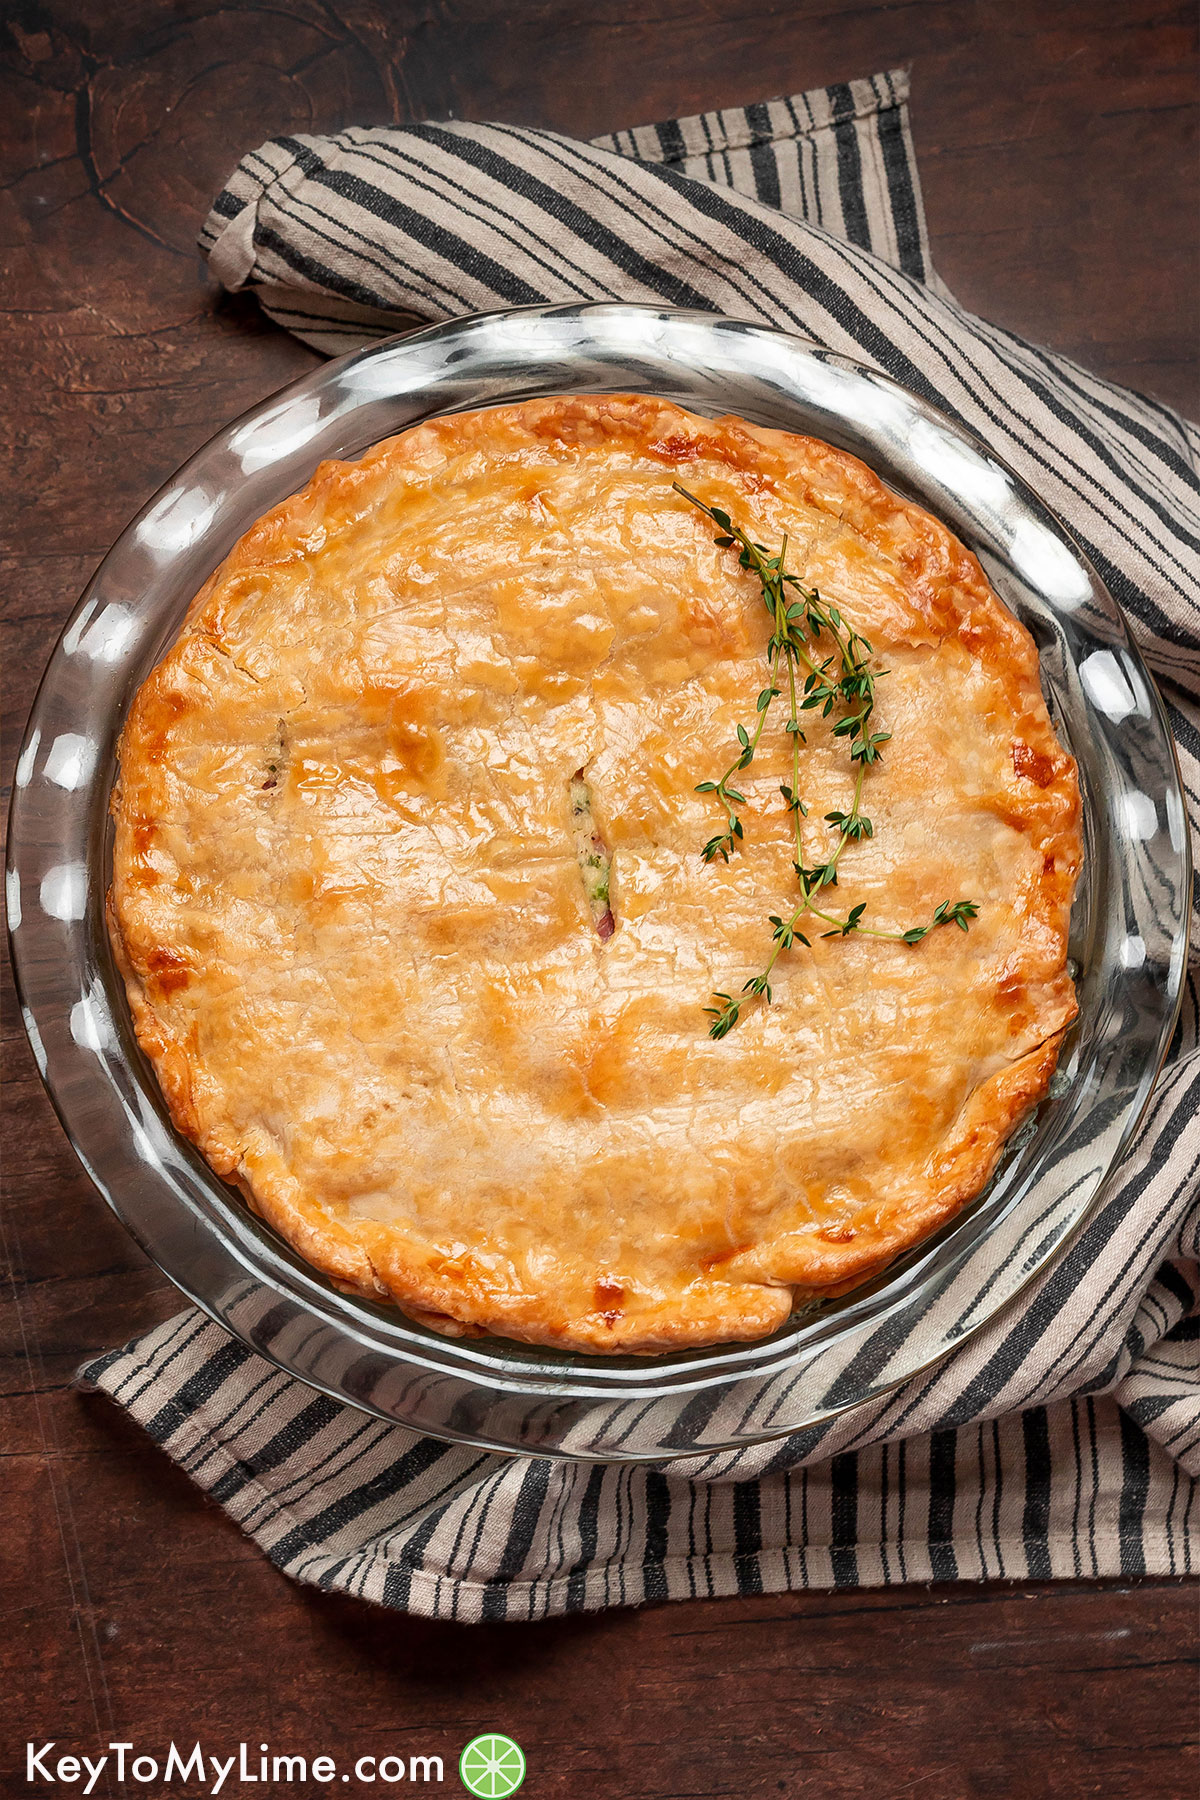 A whole ham pot pie served in a glass pie dish with a golden brown crust.